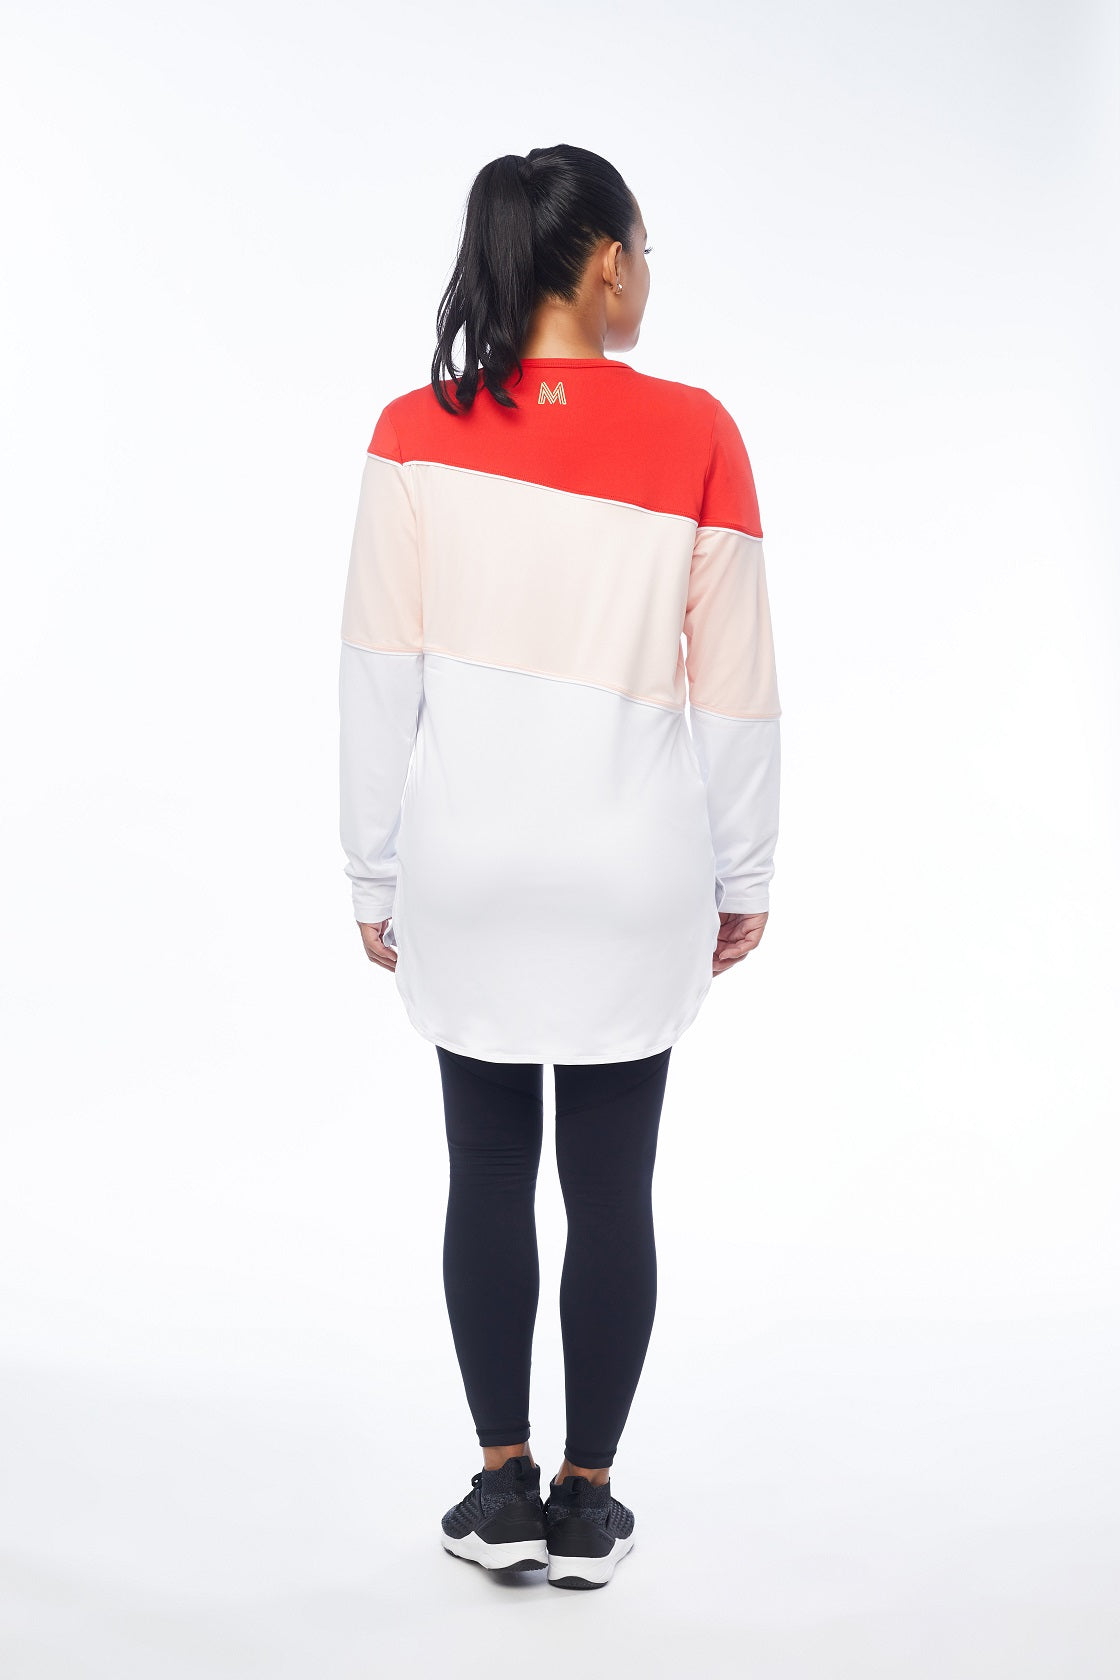 LEAP FREE Long Sleeve Top (Red / Pink / White)